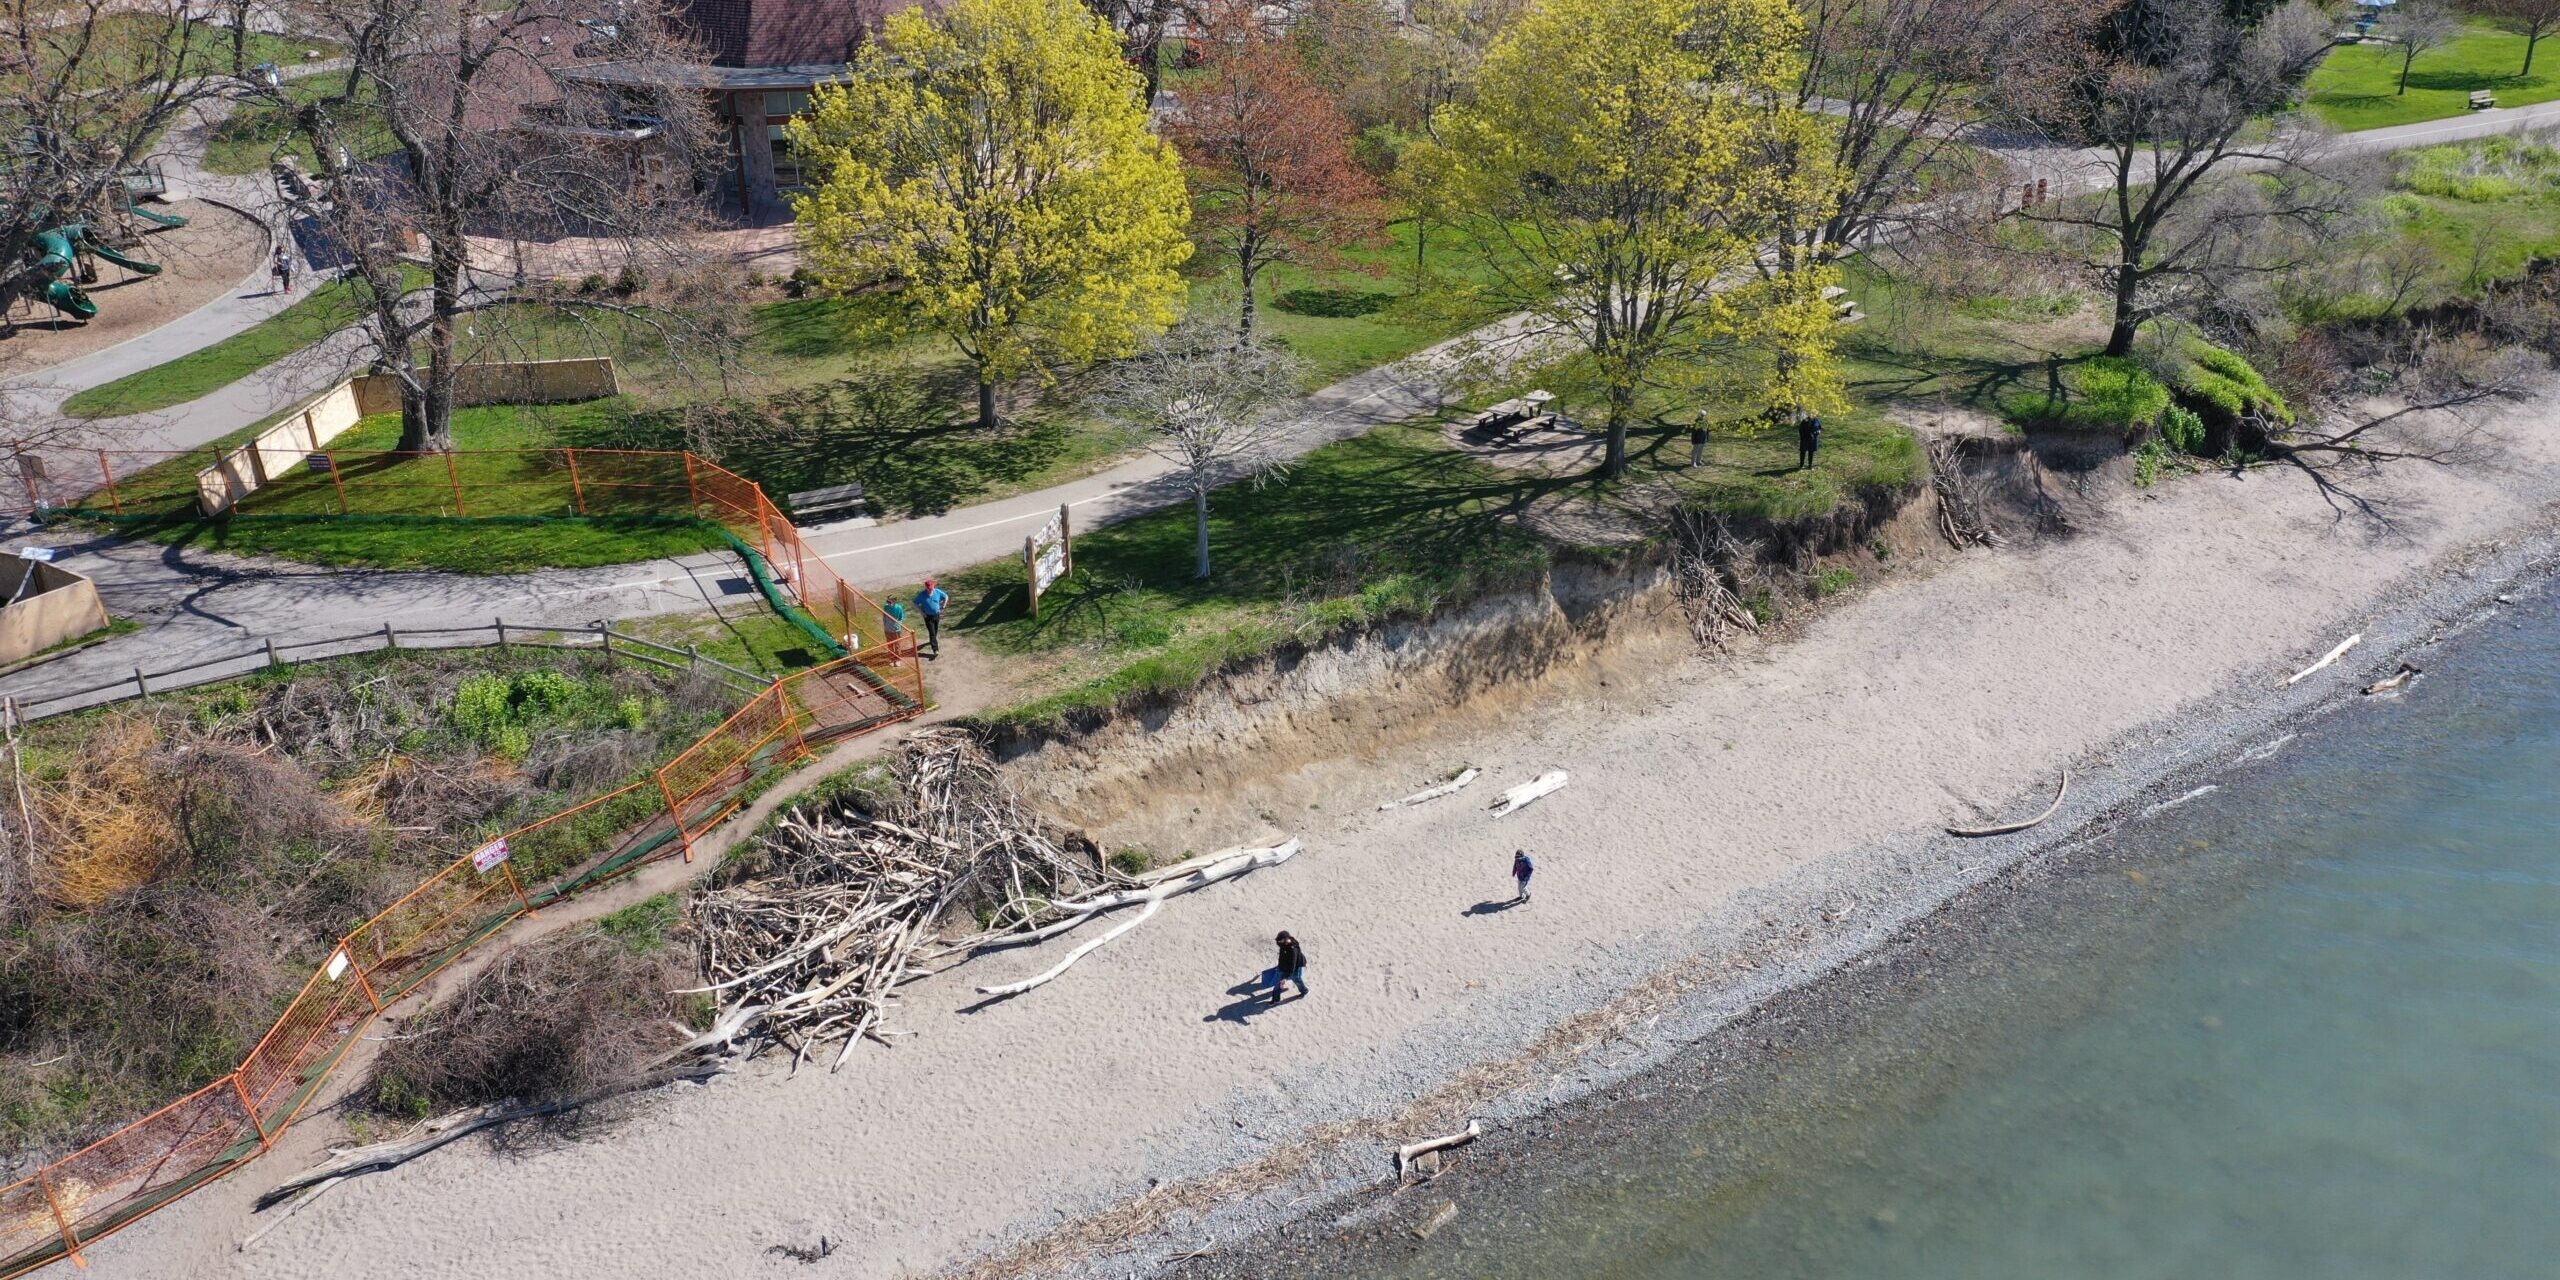 Aerial view of part of Reach 3, showing eroding bluffs close to the Waterfront Trail and other infrastructure. There is an orange fence on the bottom left corner closing one area, and several large tree limbs on the beach. Two people are walking on the beach.